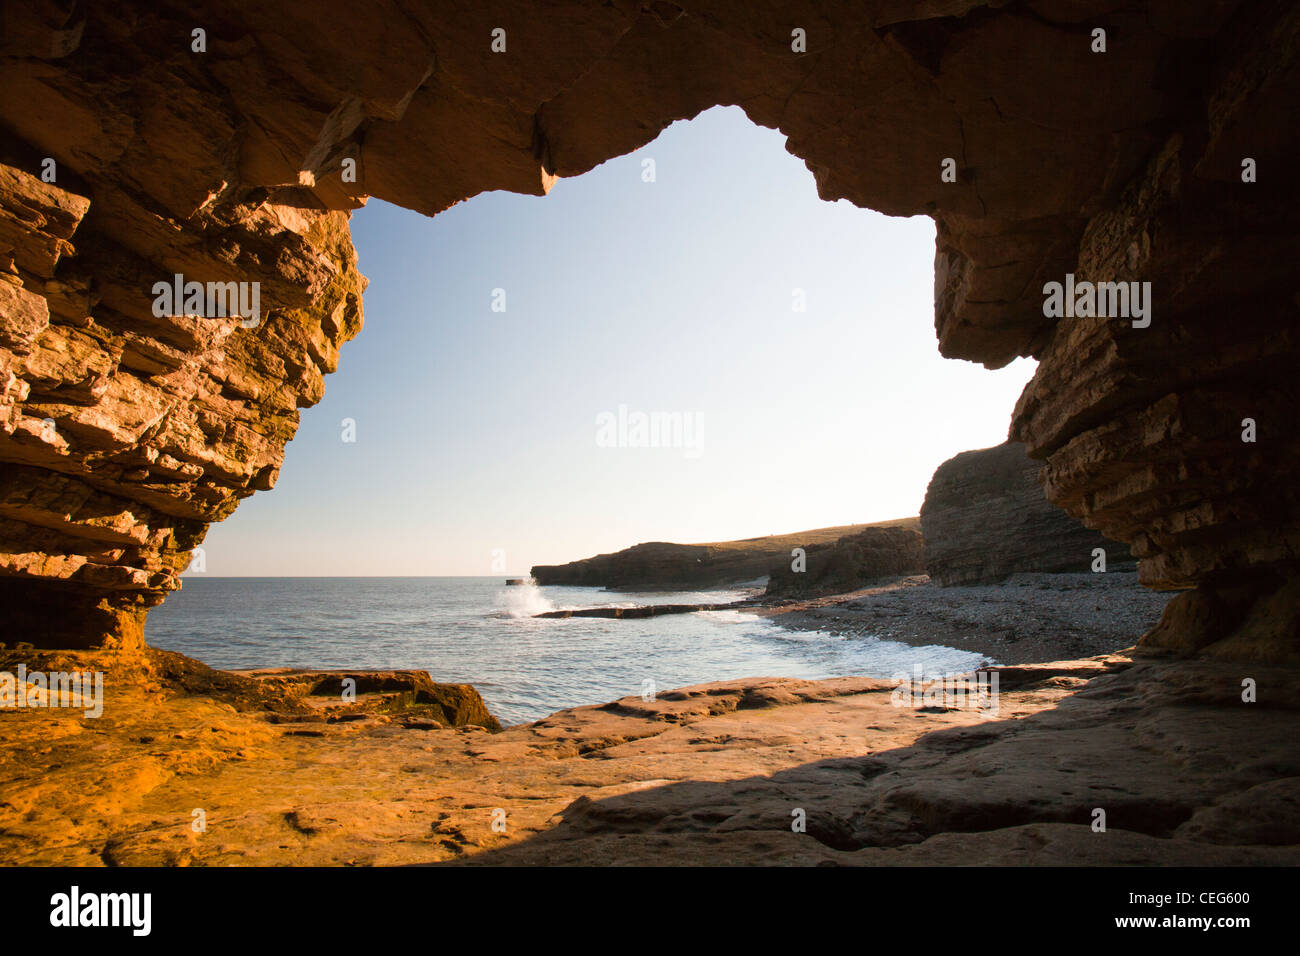 A sea cave on the North East coast at Whitburn between Newcastle and Sunderland, UK. Stock Photo